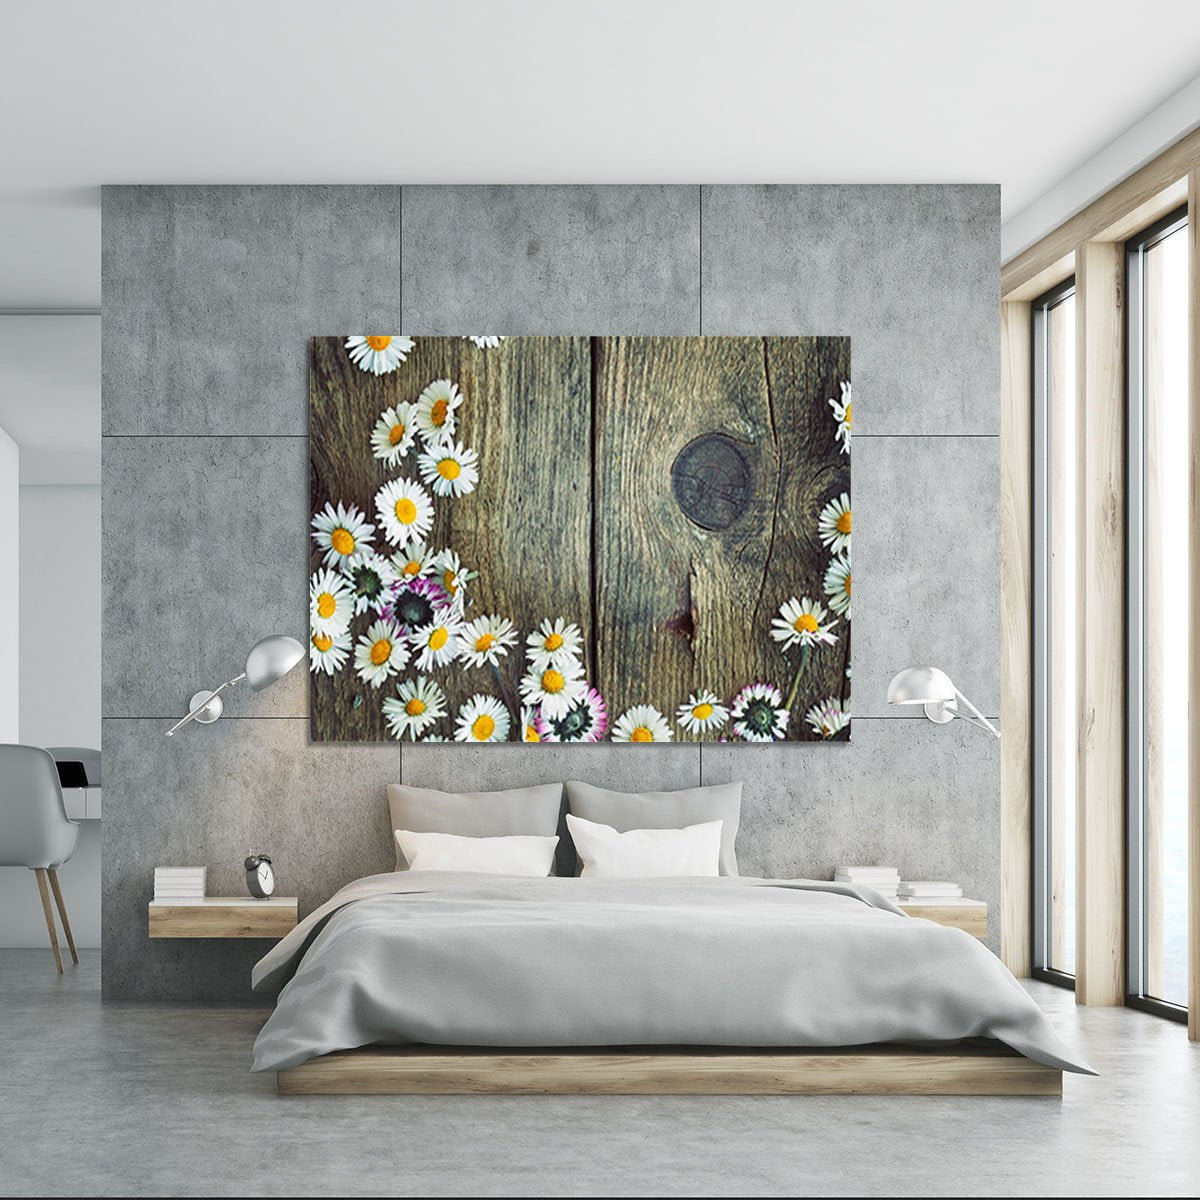 Fresh daisies on wood Canvas Print or Poster